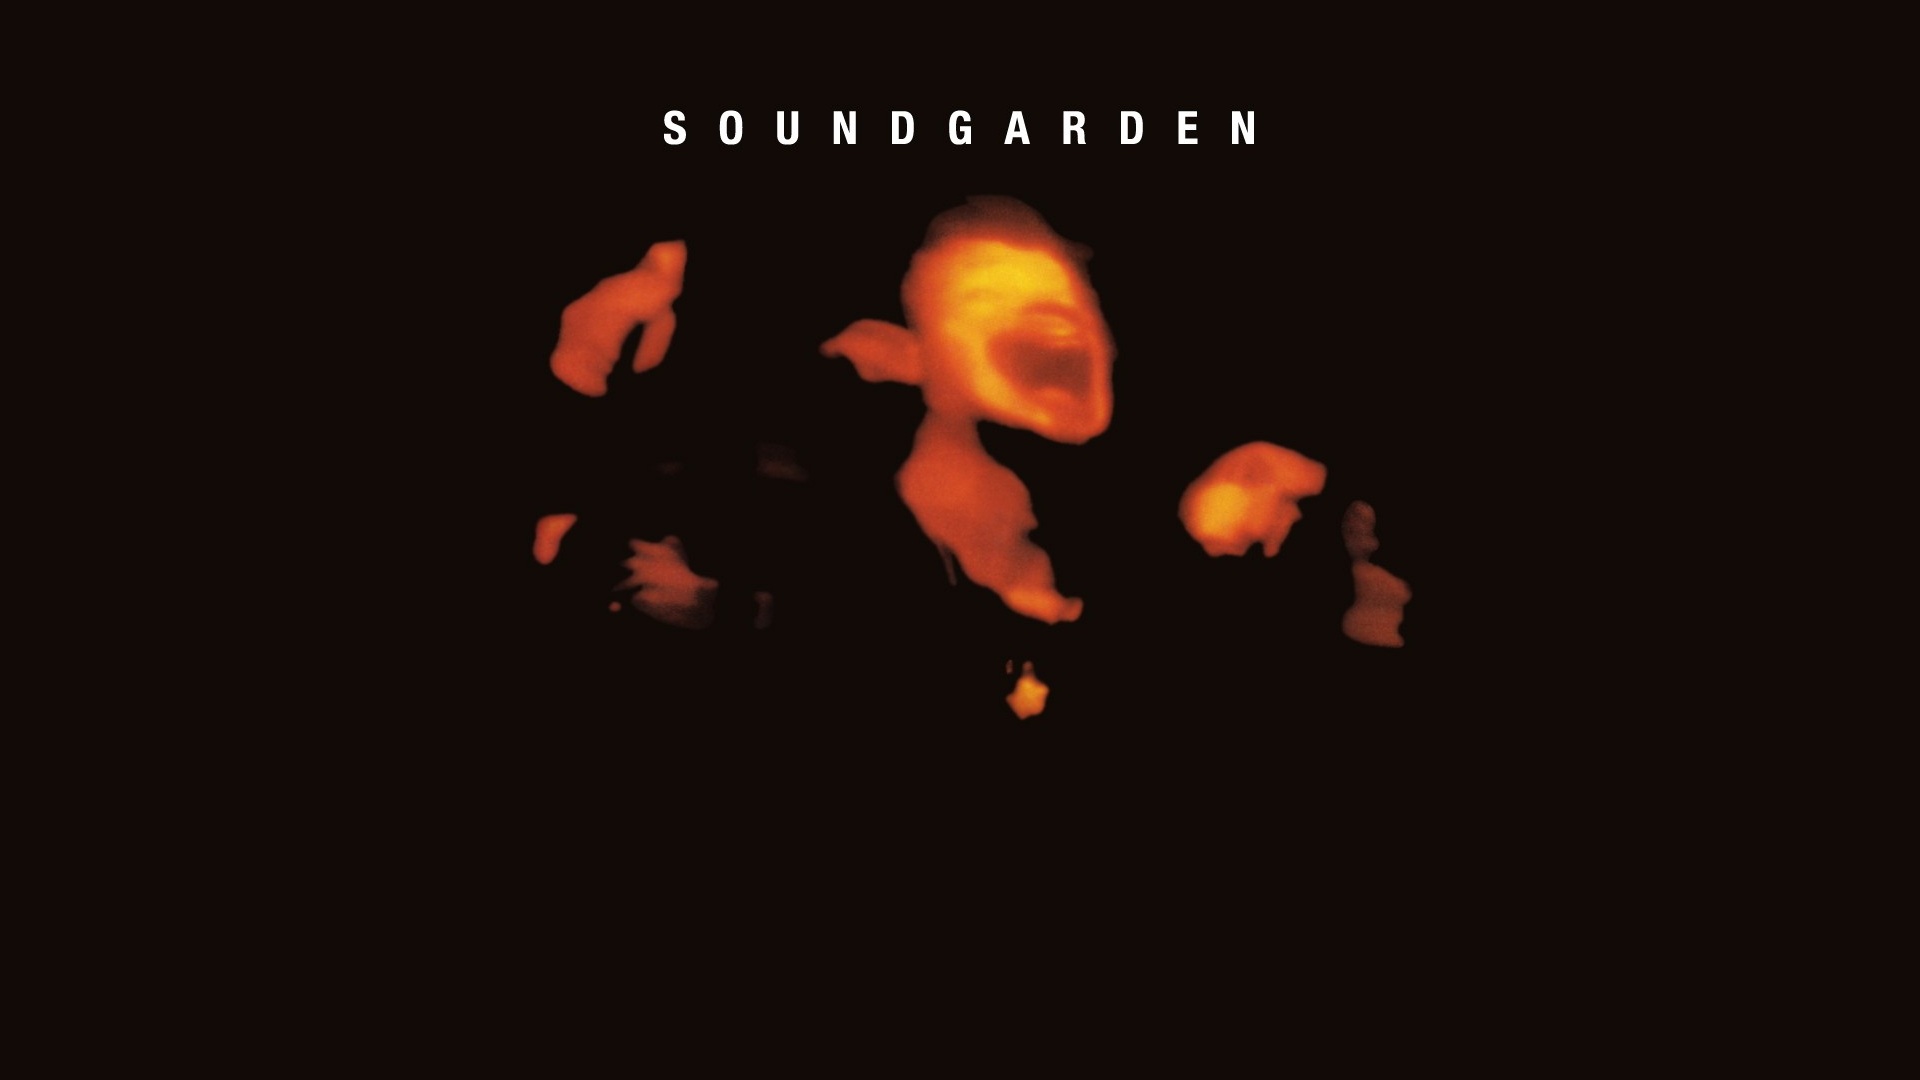 Soundgarden Confirmed For iTunes Festival At SXSW, Will Perform Entire ‘Superunknown’ Album